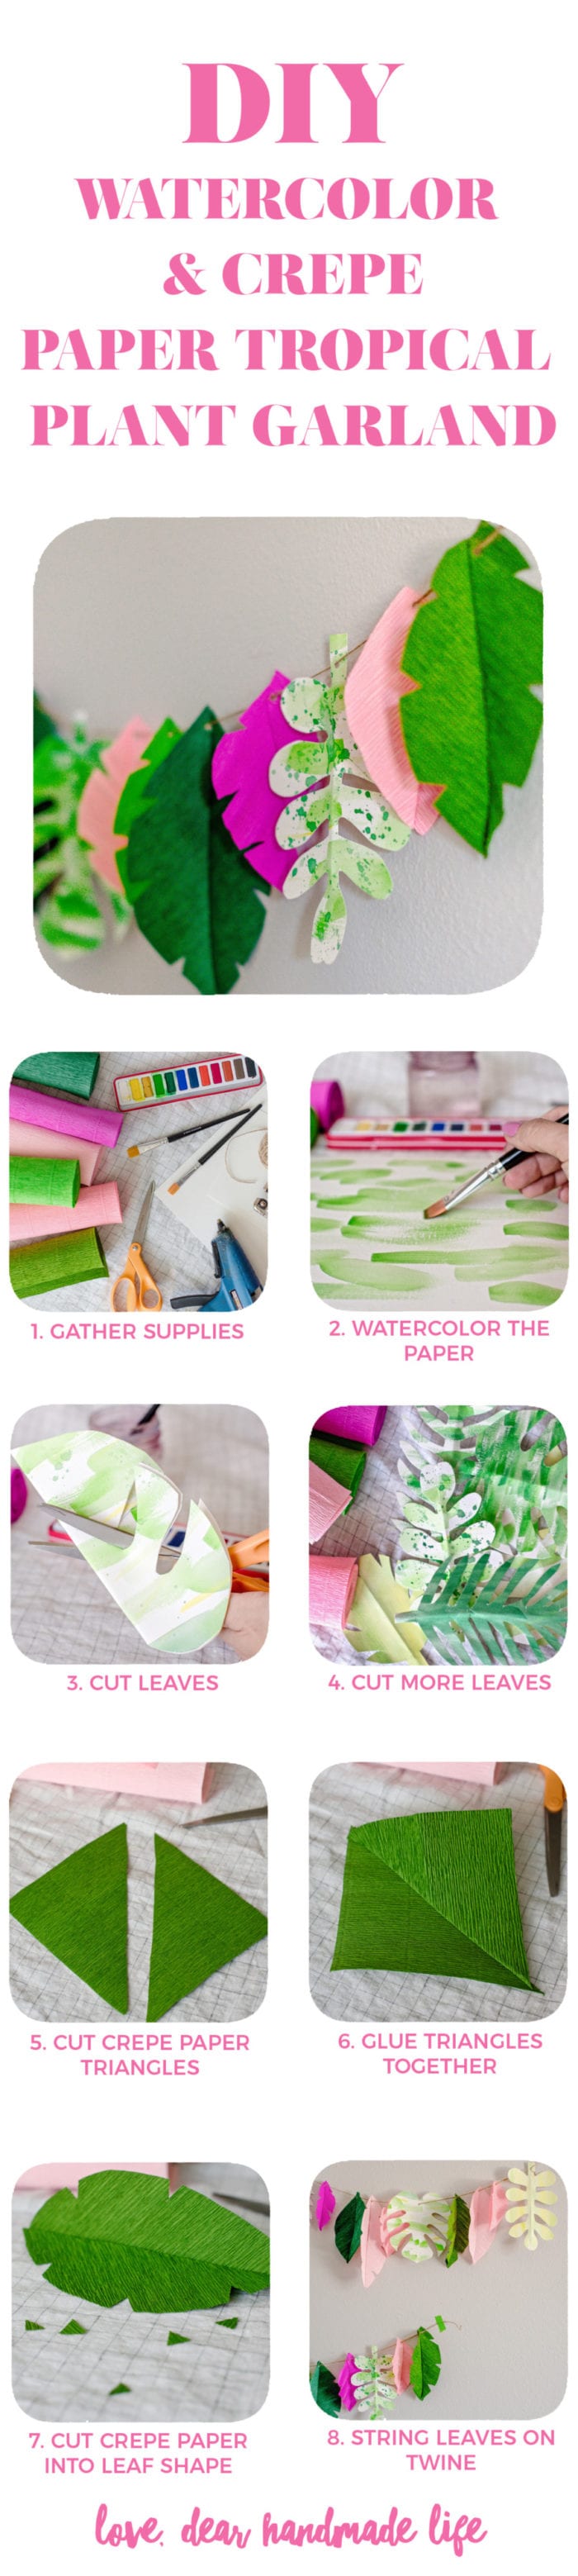 DIY watercolor and crepe paper tropical monstera plant garland from Dear Handmade Life